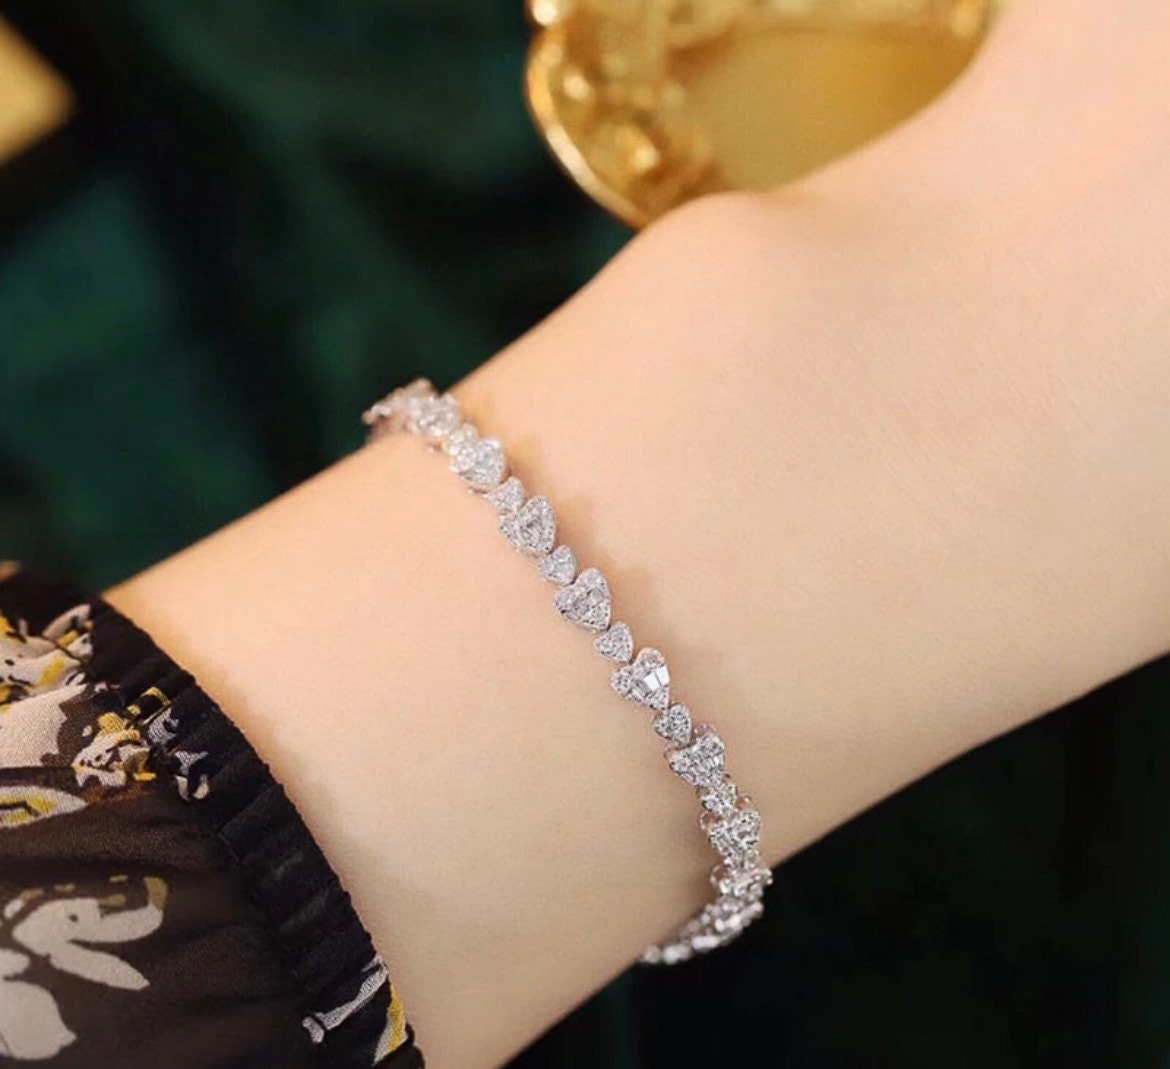 Product Detail:  18k White Gold Bracelet Length 17cm Weight 8.30g 2.40ct Natural Diamond SI Clarity Color H